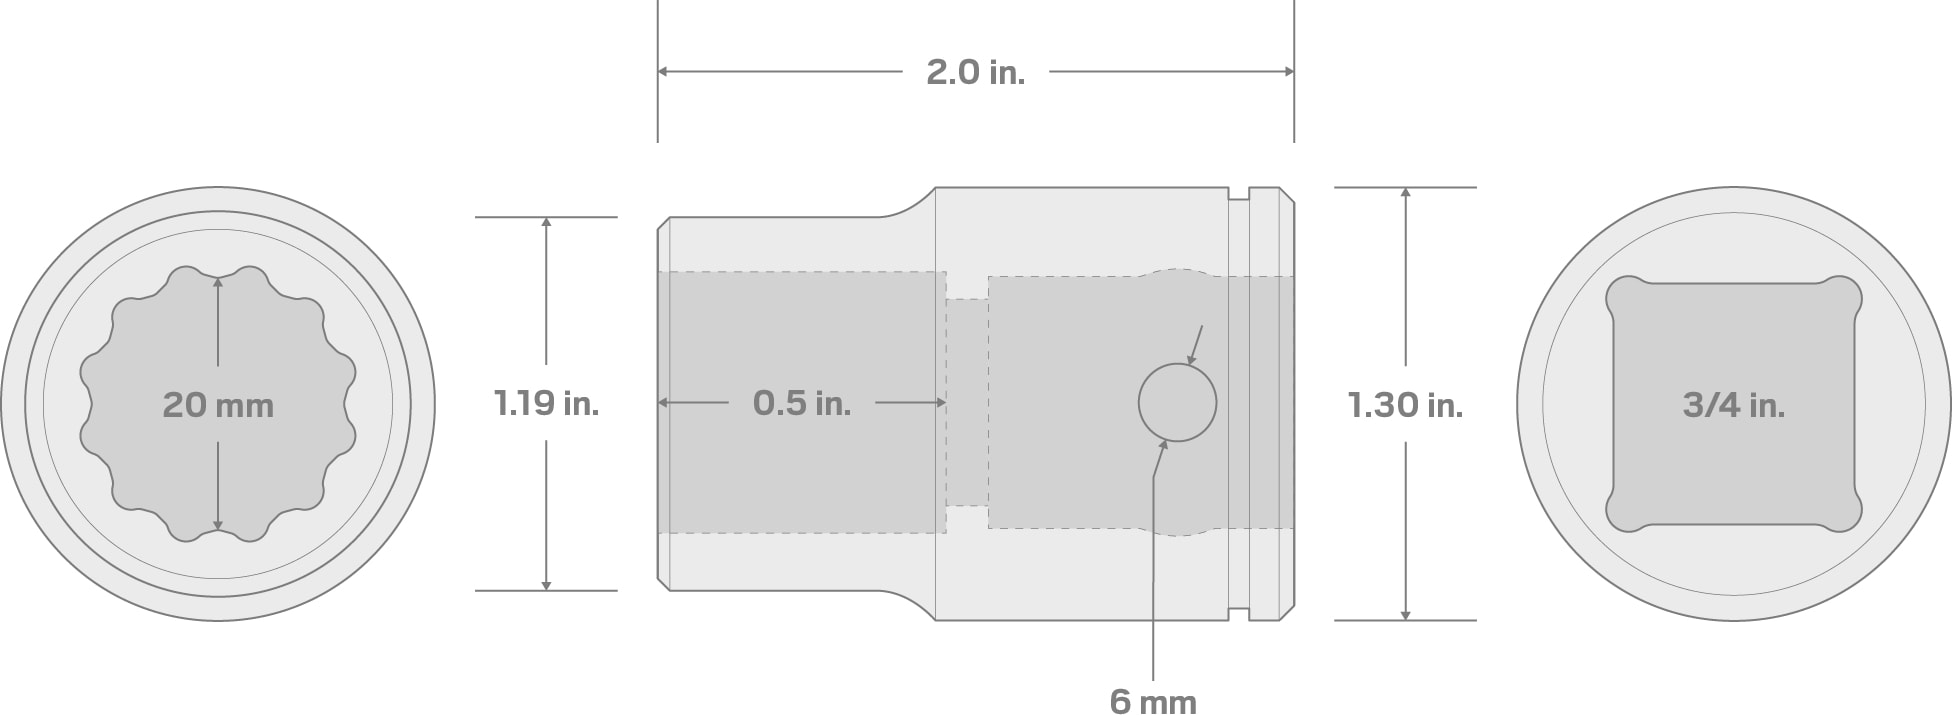 Specs for 3/4 Inch Drive x 20 mm 12-Point Socket